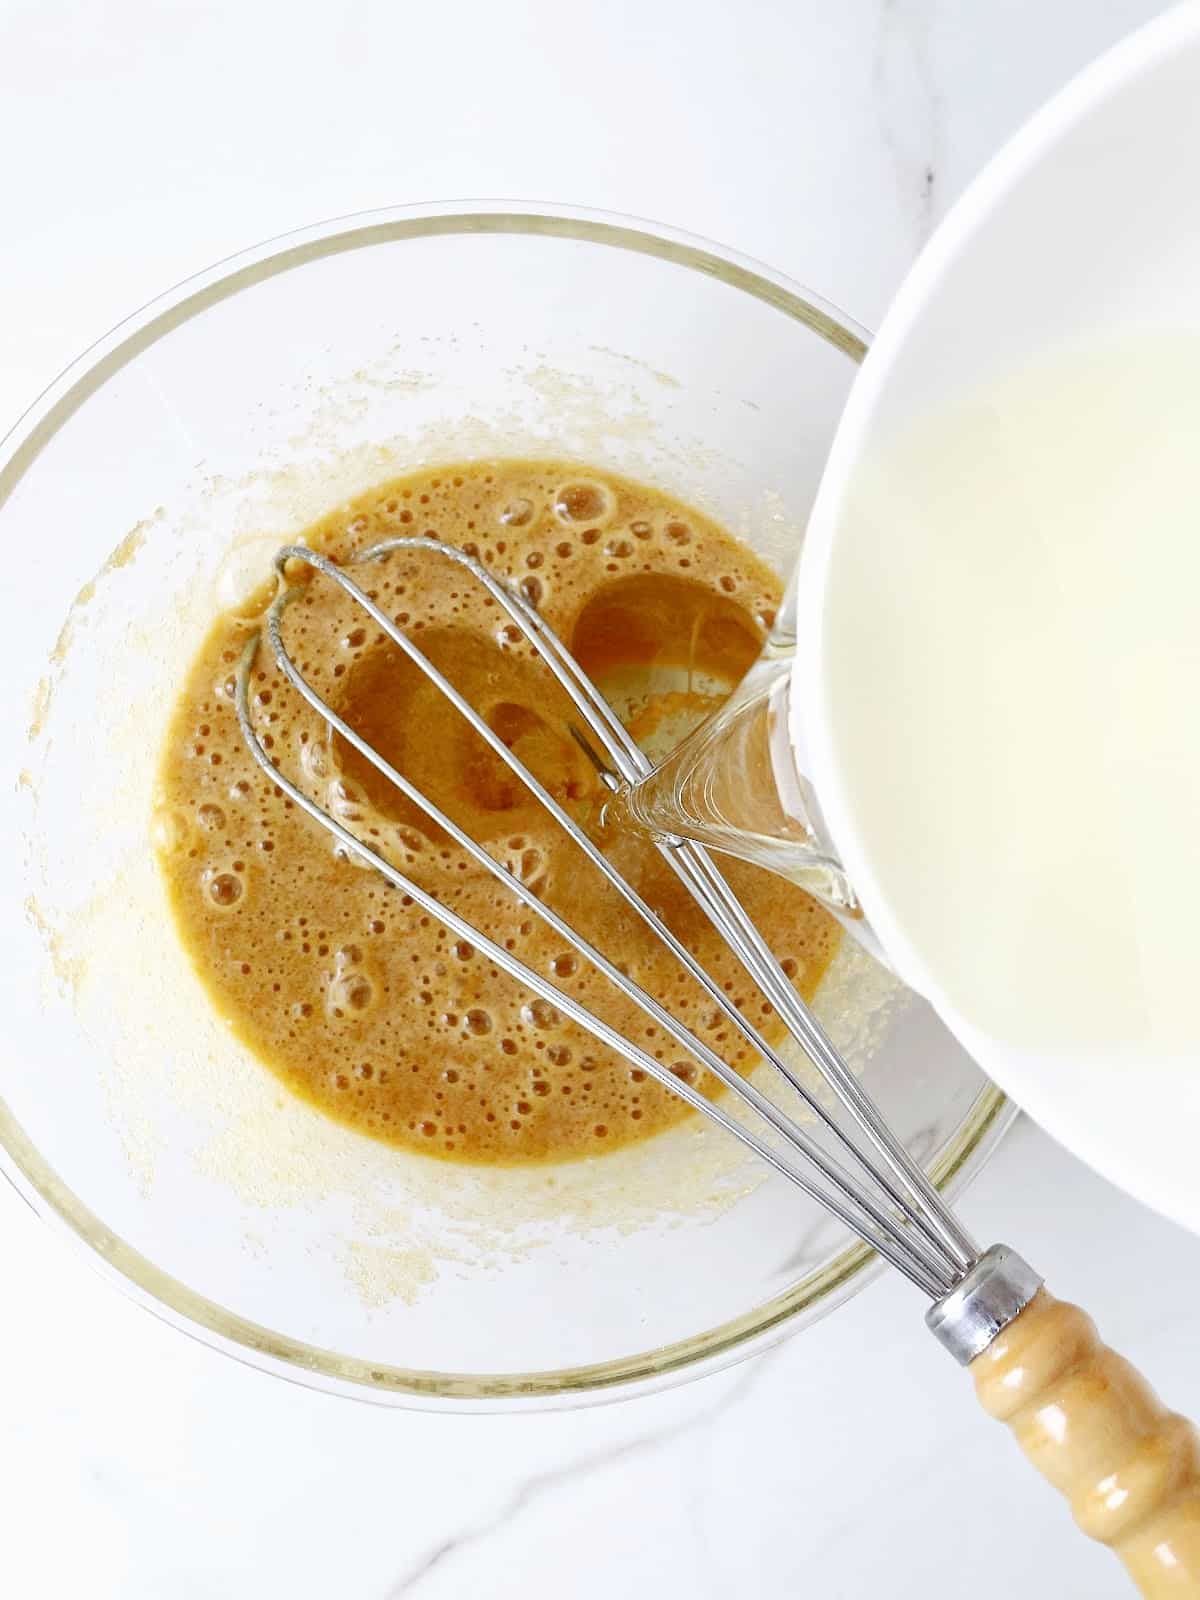 Adding oil to brown sugar muffin mixture in glass bowl with a whisk.